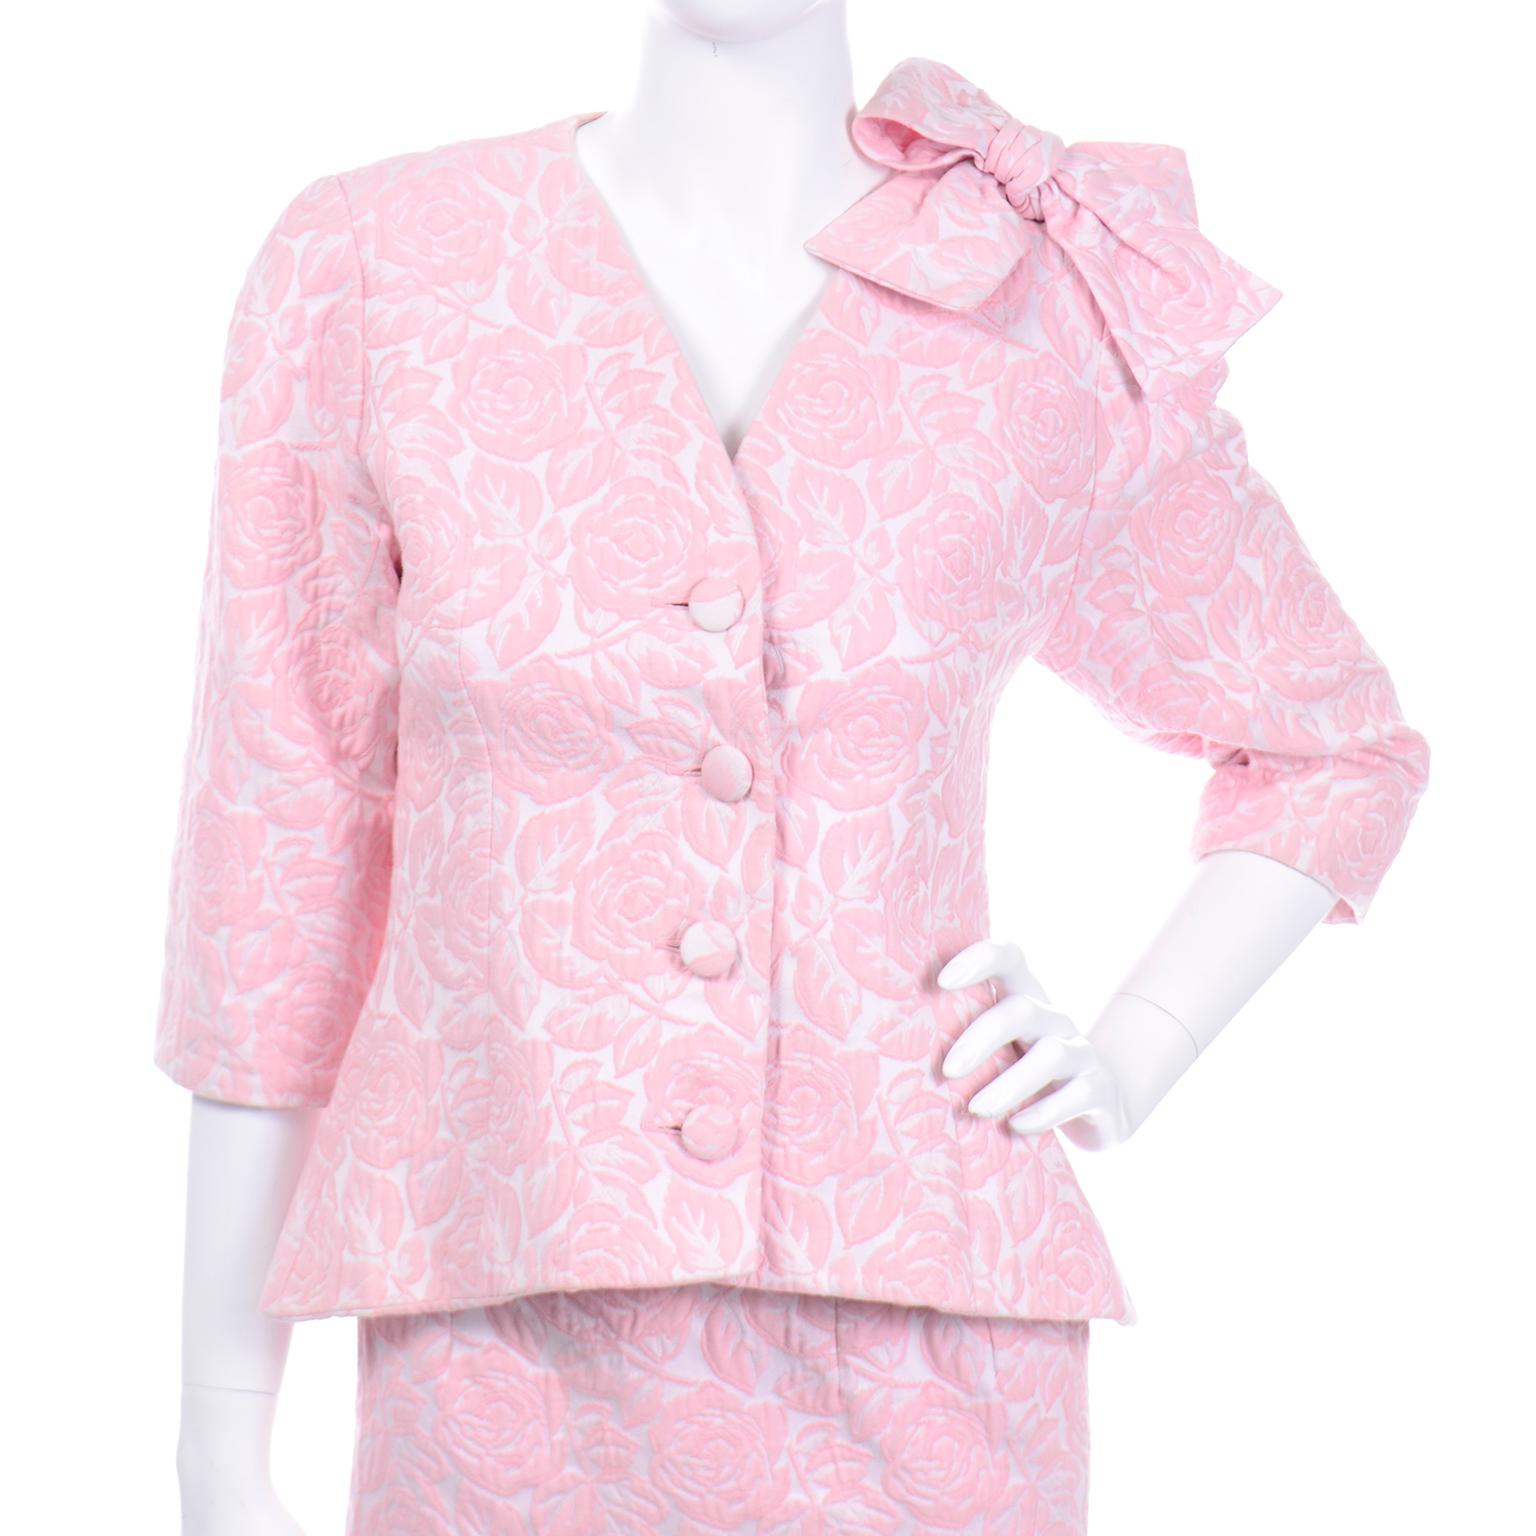 Guy Laroche Boutique Paris Vintage Pink Skirt Suit With Bow In Excellent Condition For Sale In Portland, OR